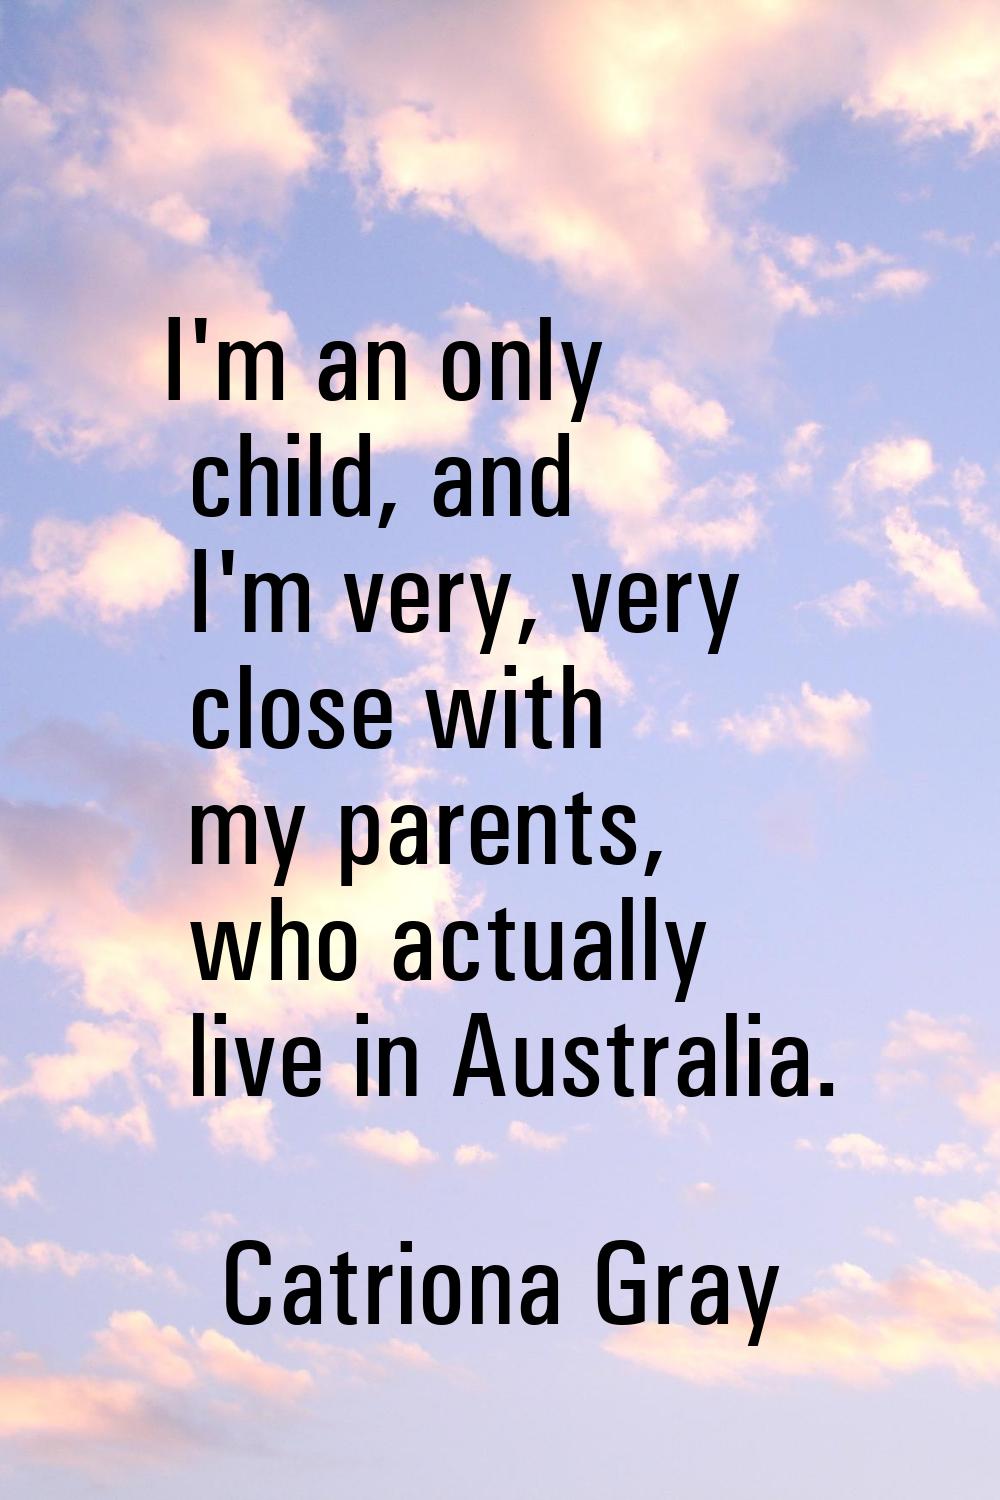 I'm an only child, and I'm very, very close with my parents, who actually live in Australia.